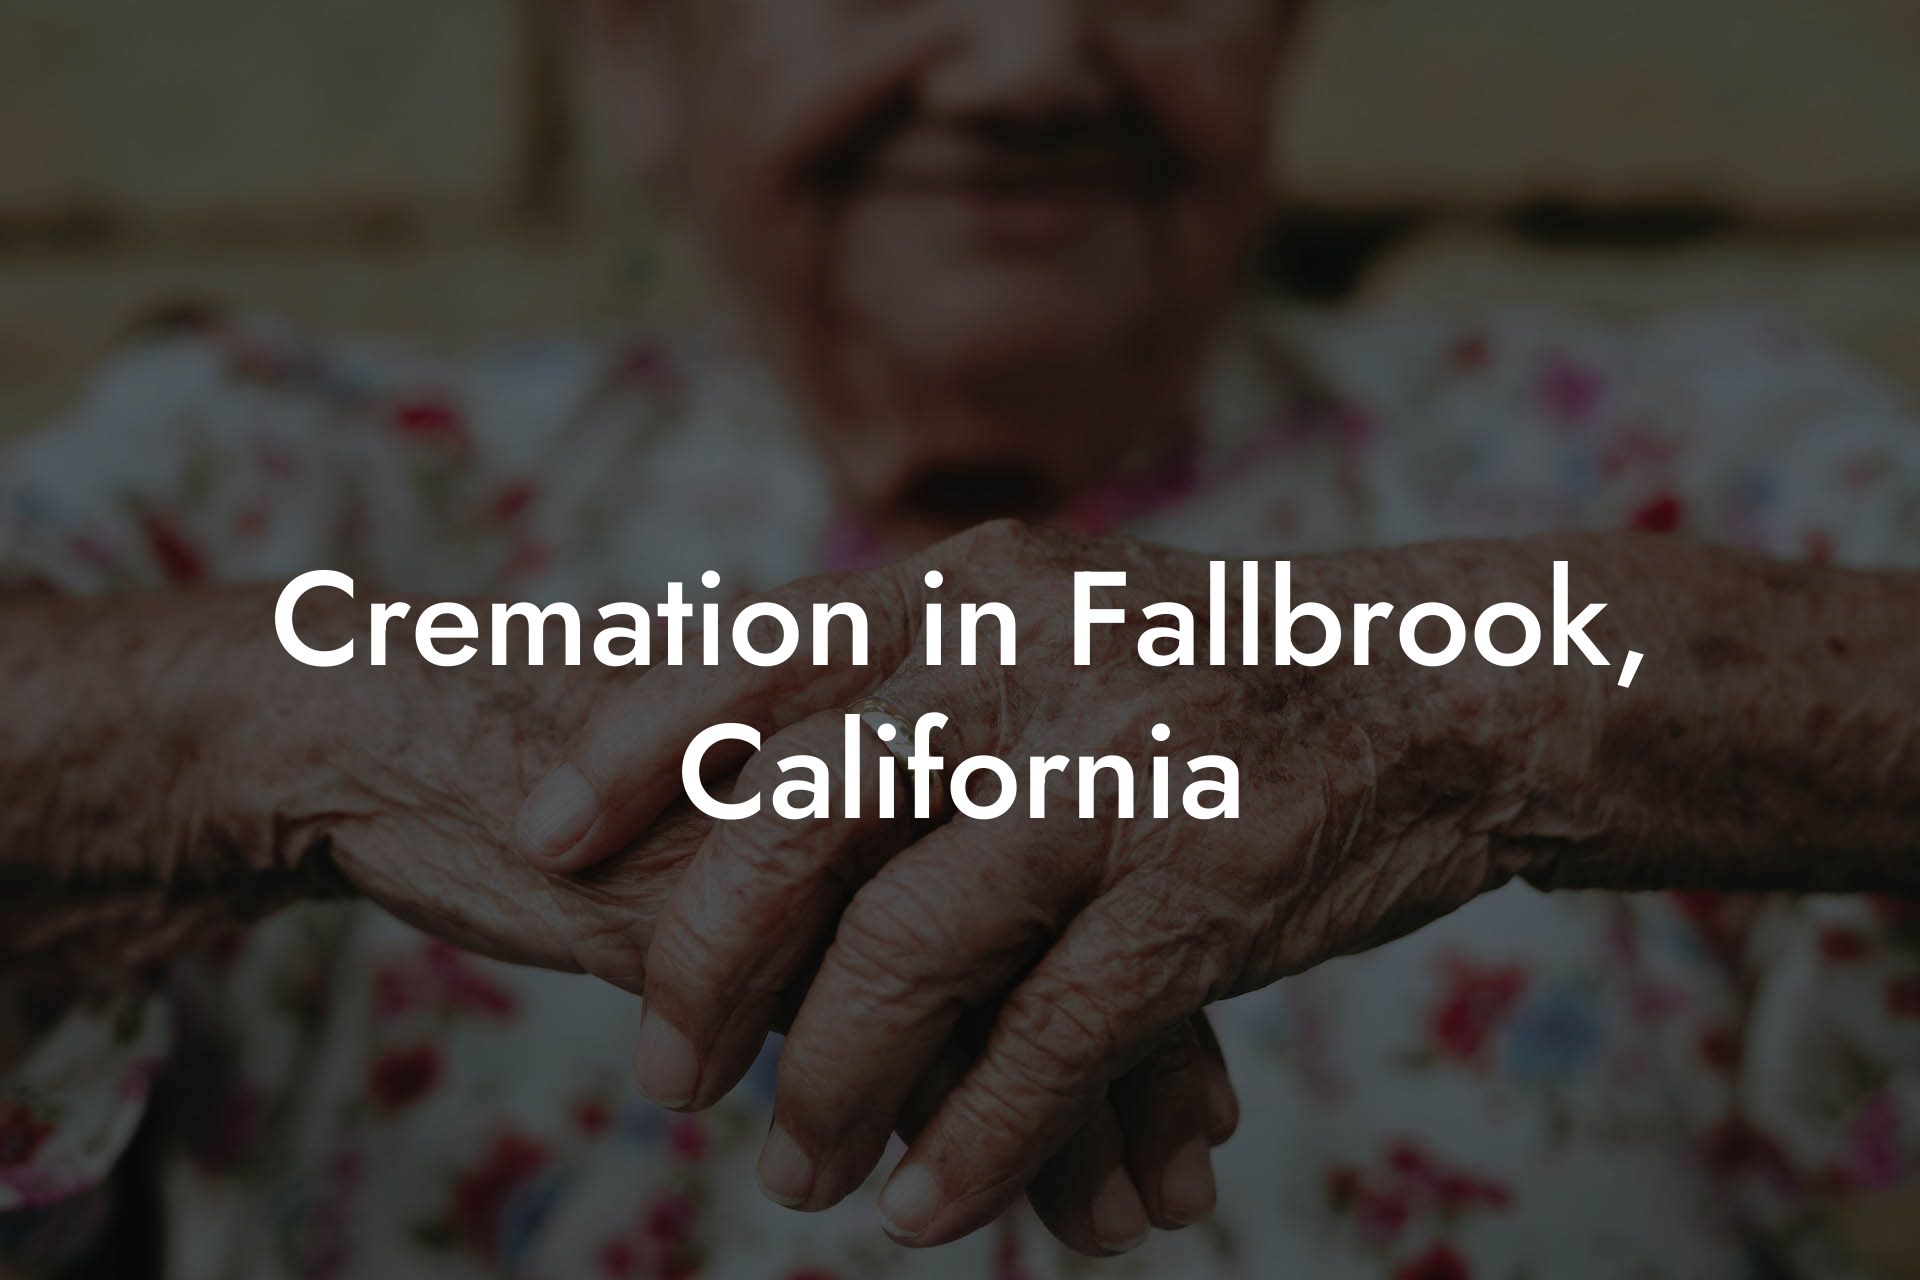 Cremation in Fallbrook, California